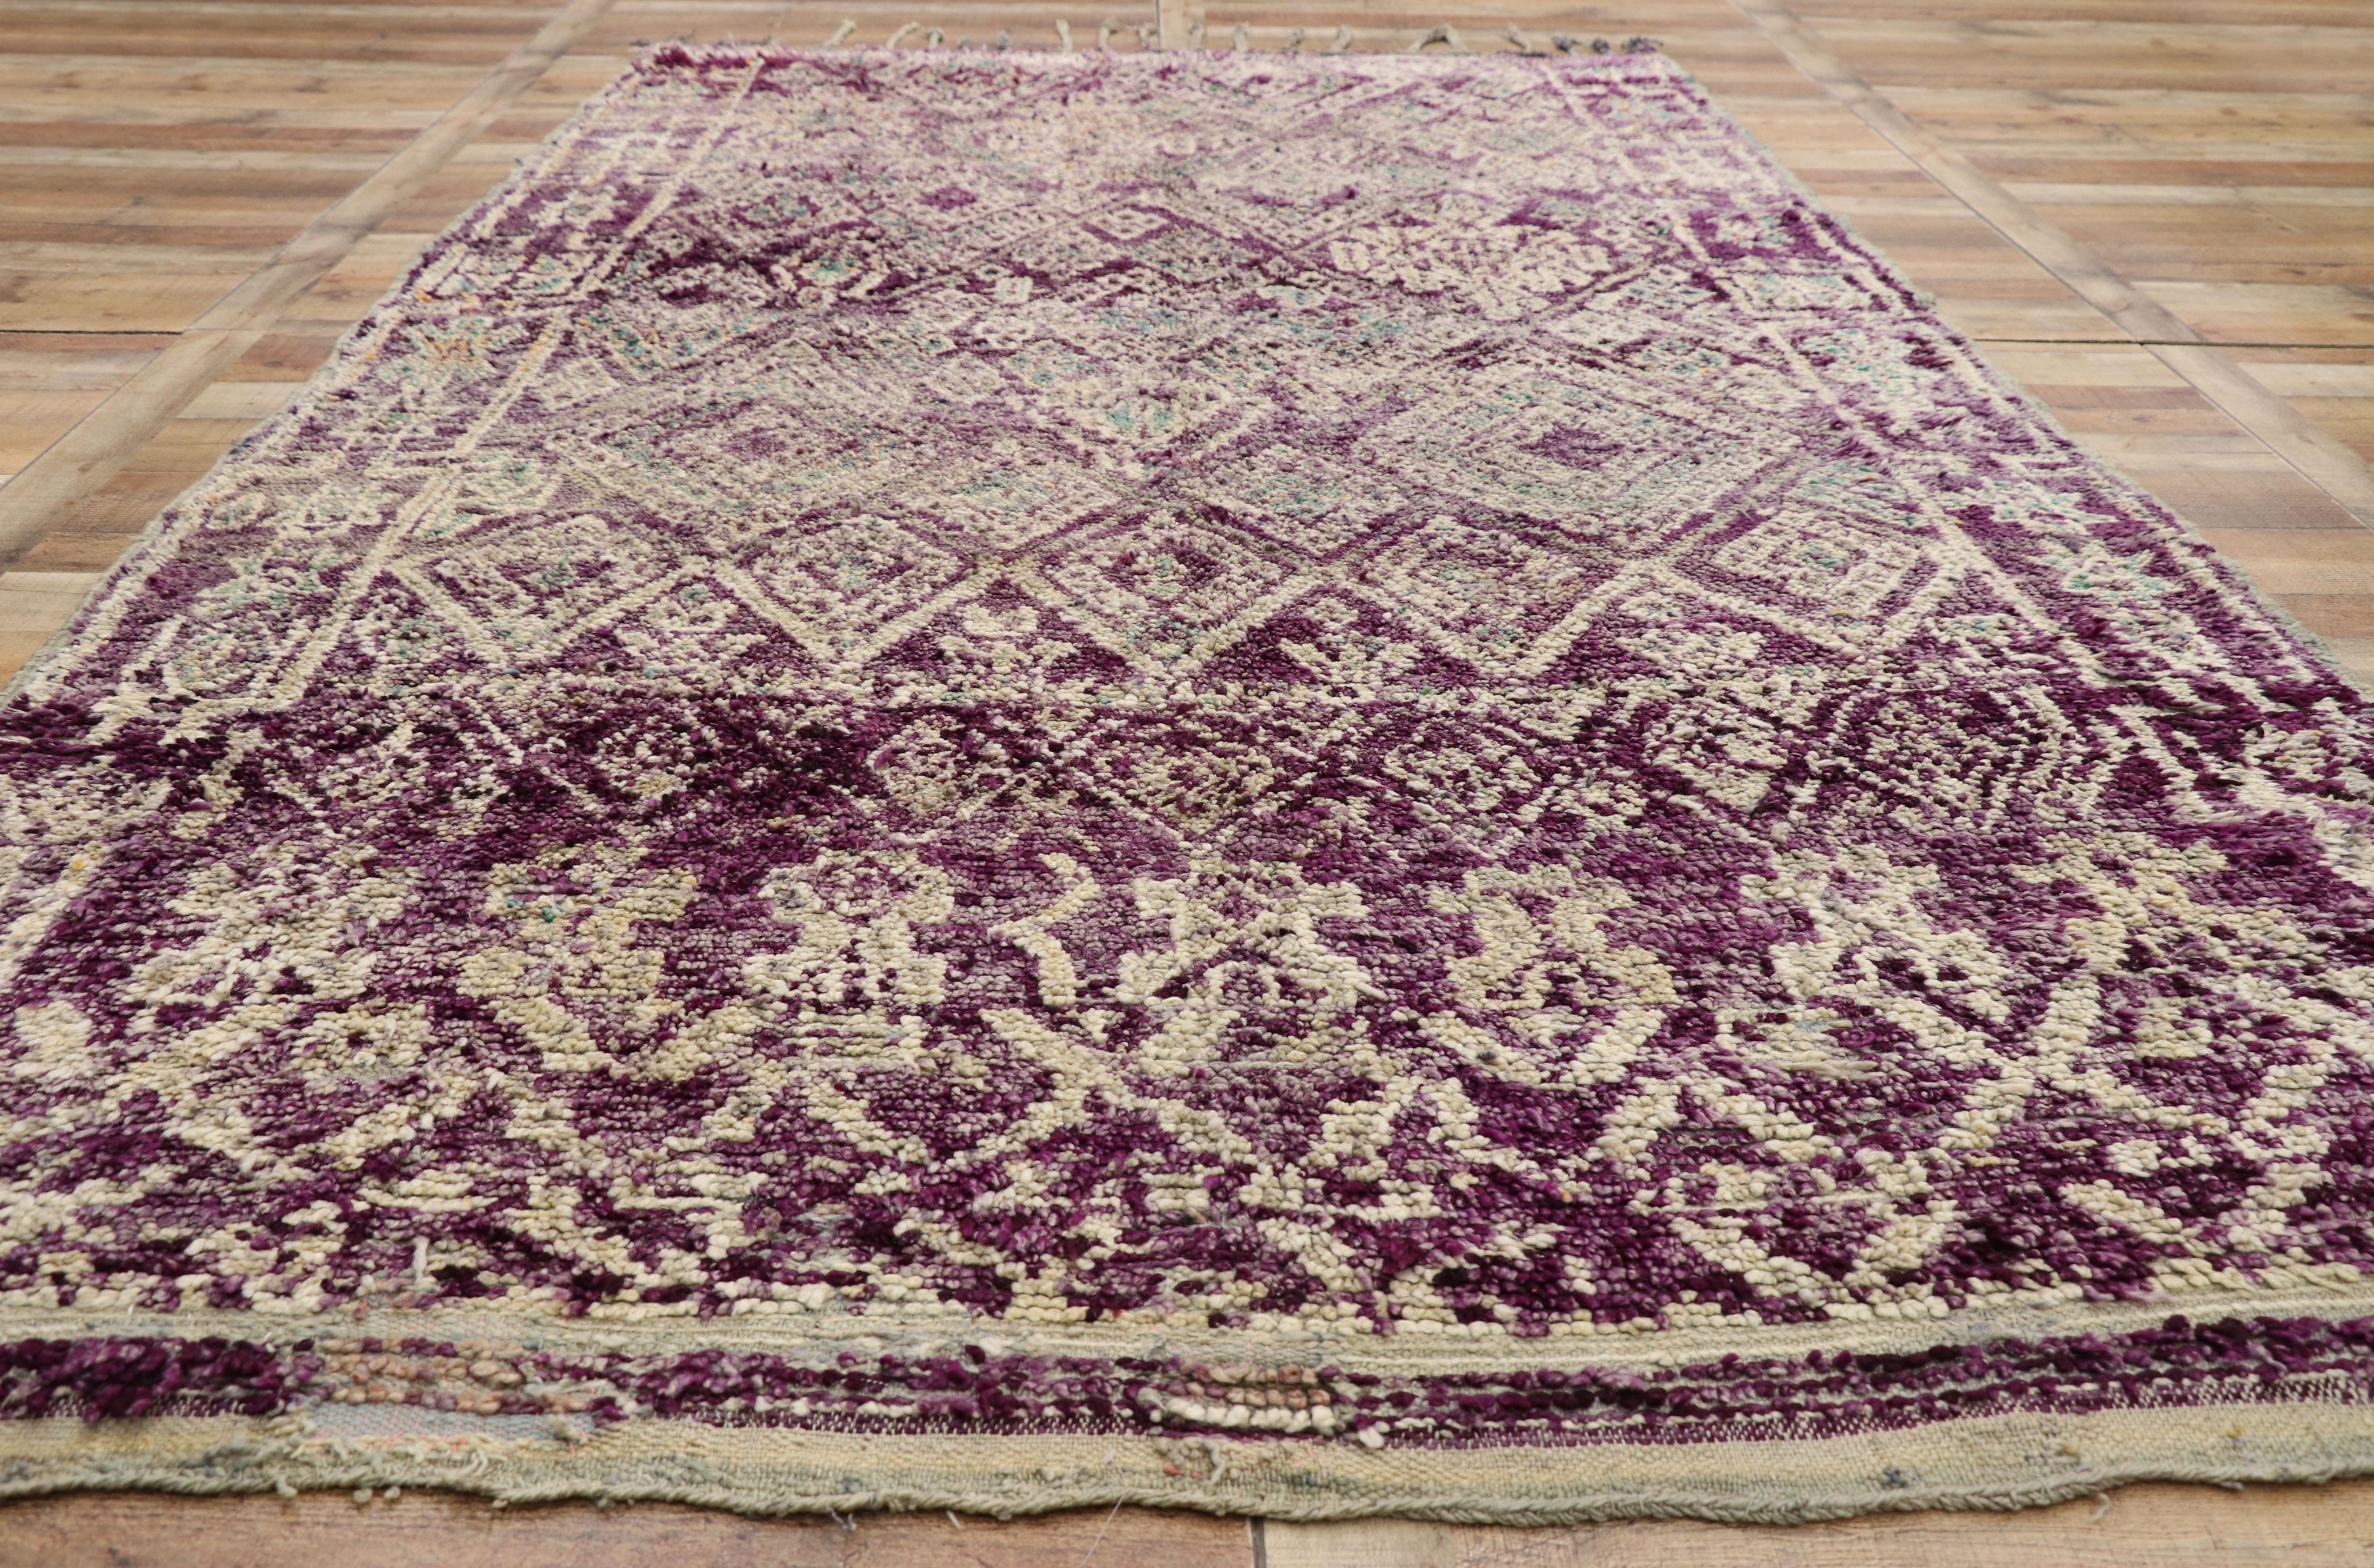 Vintage Berber Purple Moroccan Mrirt Rug with Tribal Style 1